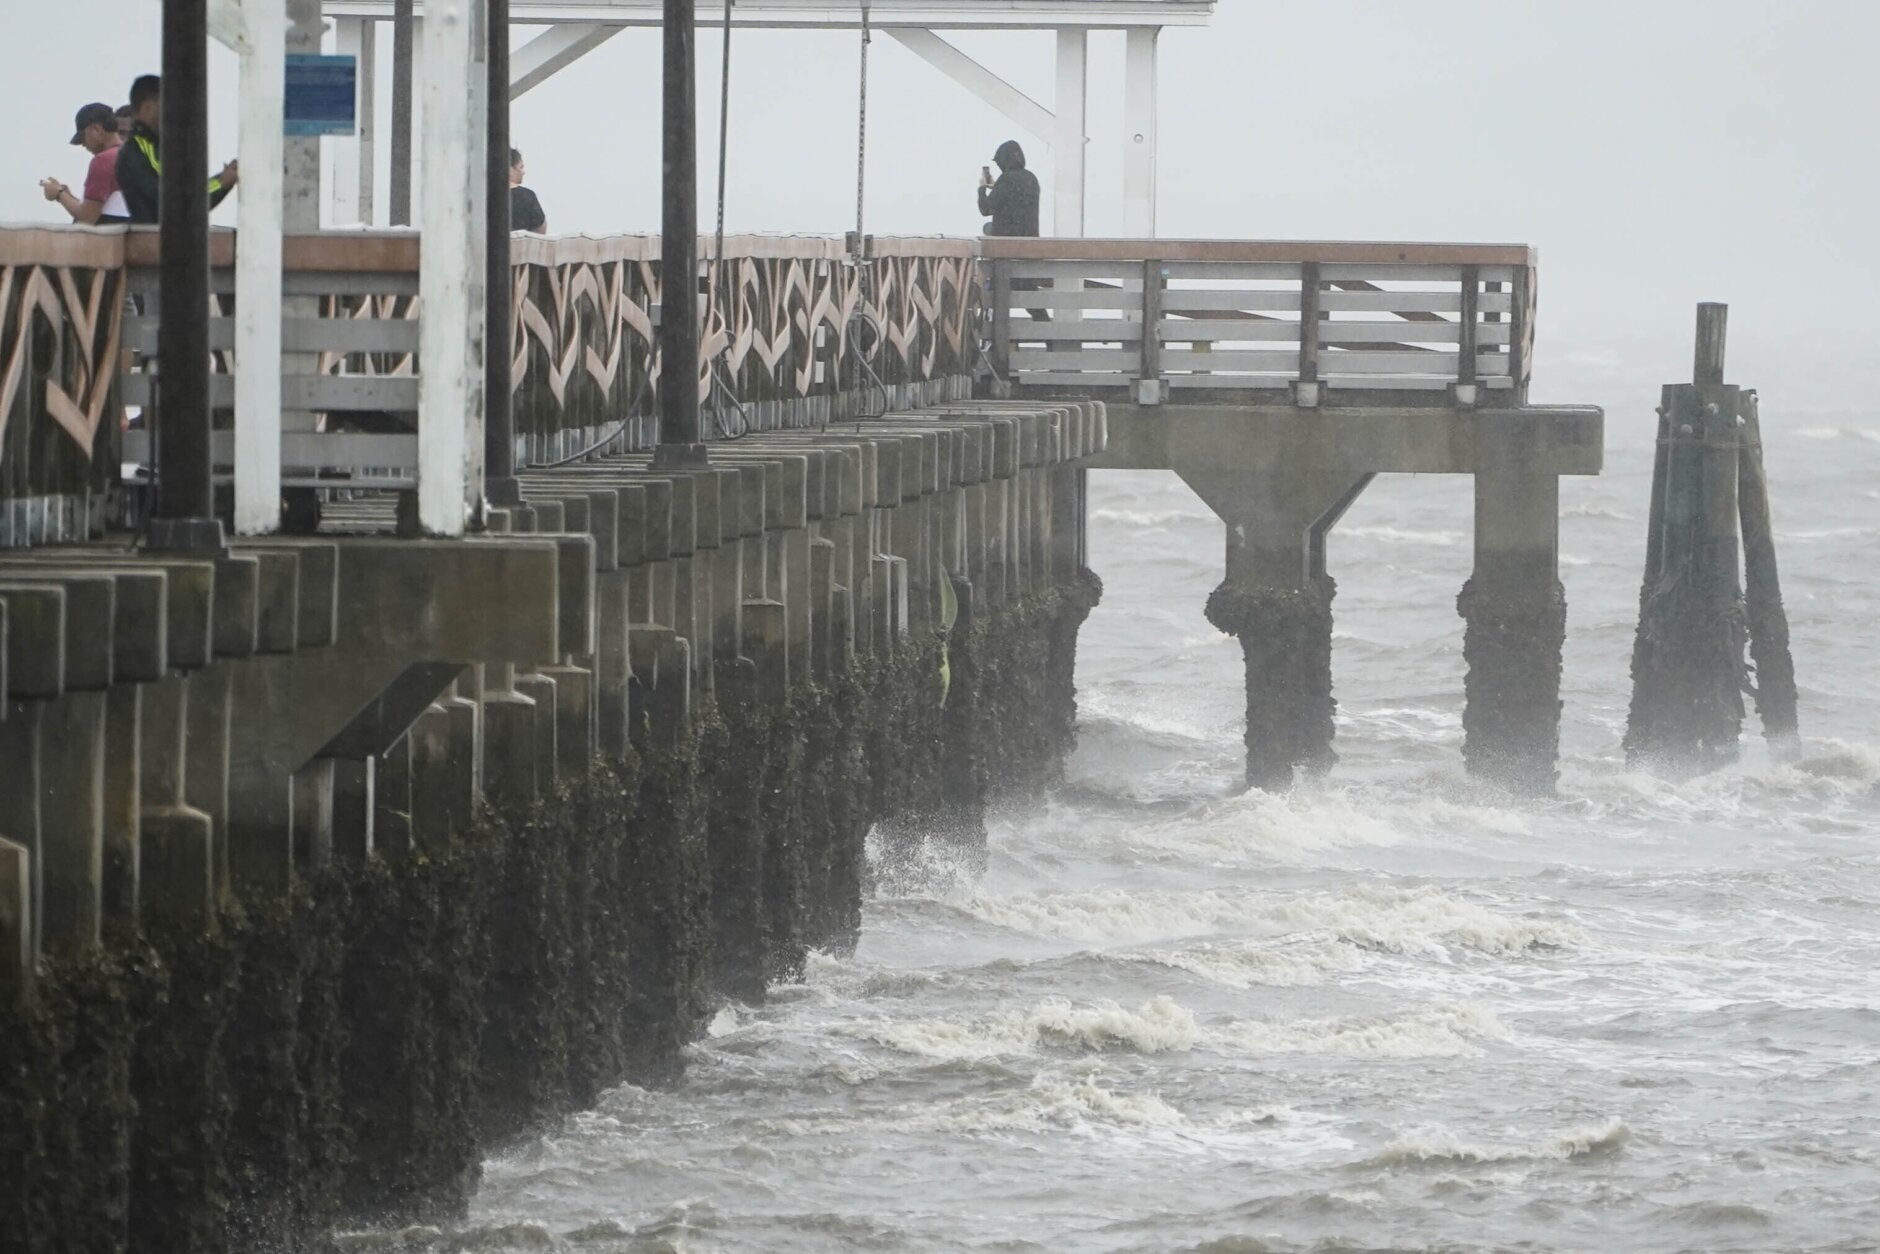 Waves crash along the Ballast Point Pier ahead of Hurricane Ian, Wednesday, Sept. 28, 2022, in Tampa, Fla. The U.S. National Hurricane Center says Ian's most damaging winds have begun hitting Florida's southwest coast as the storm approaches landfall.   (AP Photo/Chris O'Meara)